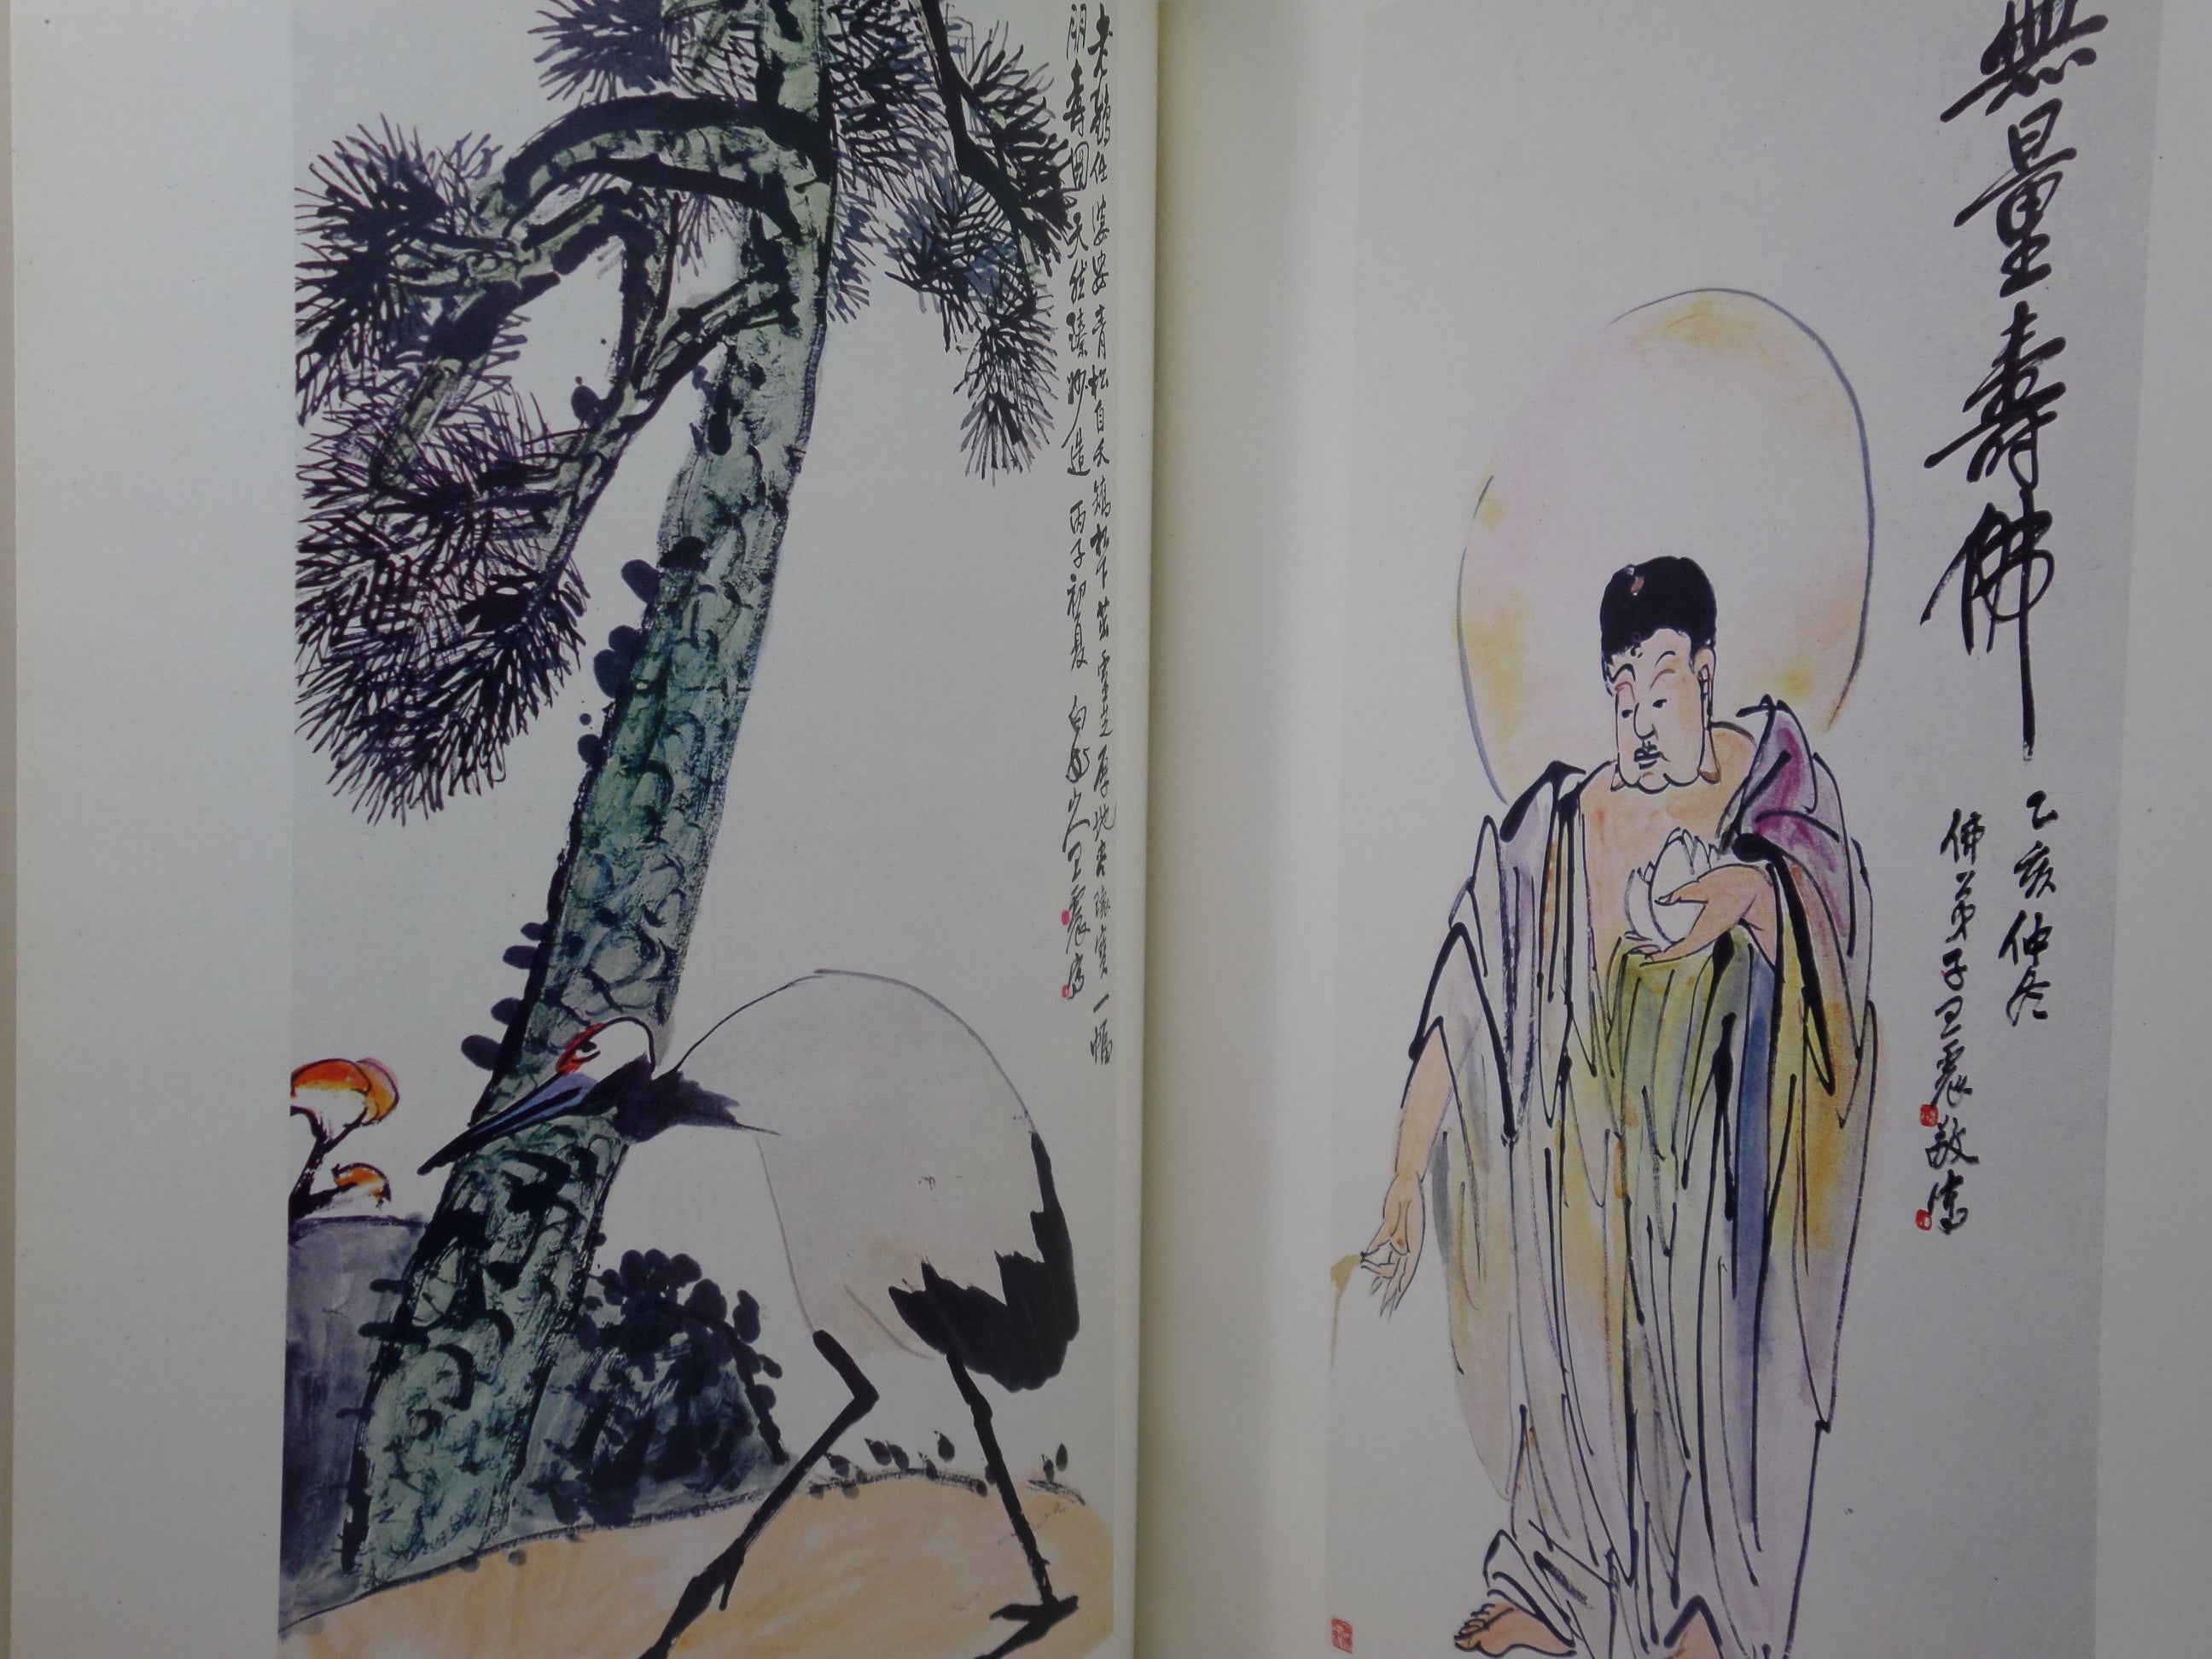 A COLLECTION OF WANG YITING'S CALLIGRAPHY AND PAINTINGS 1988 HARDBACK